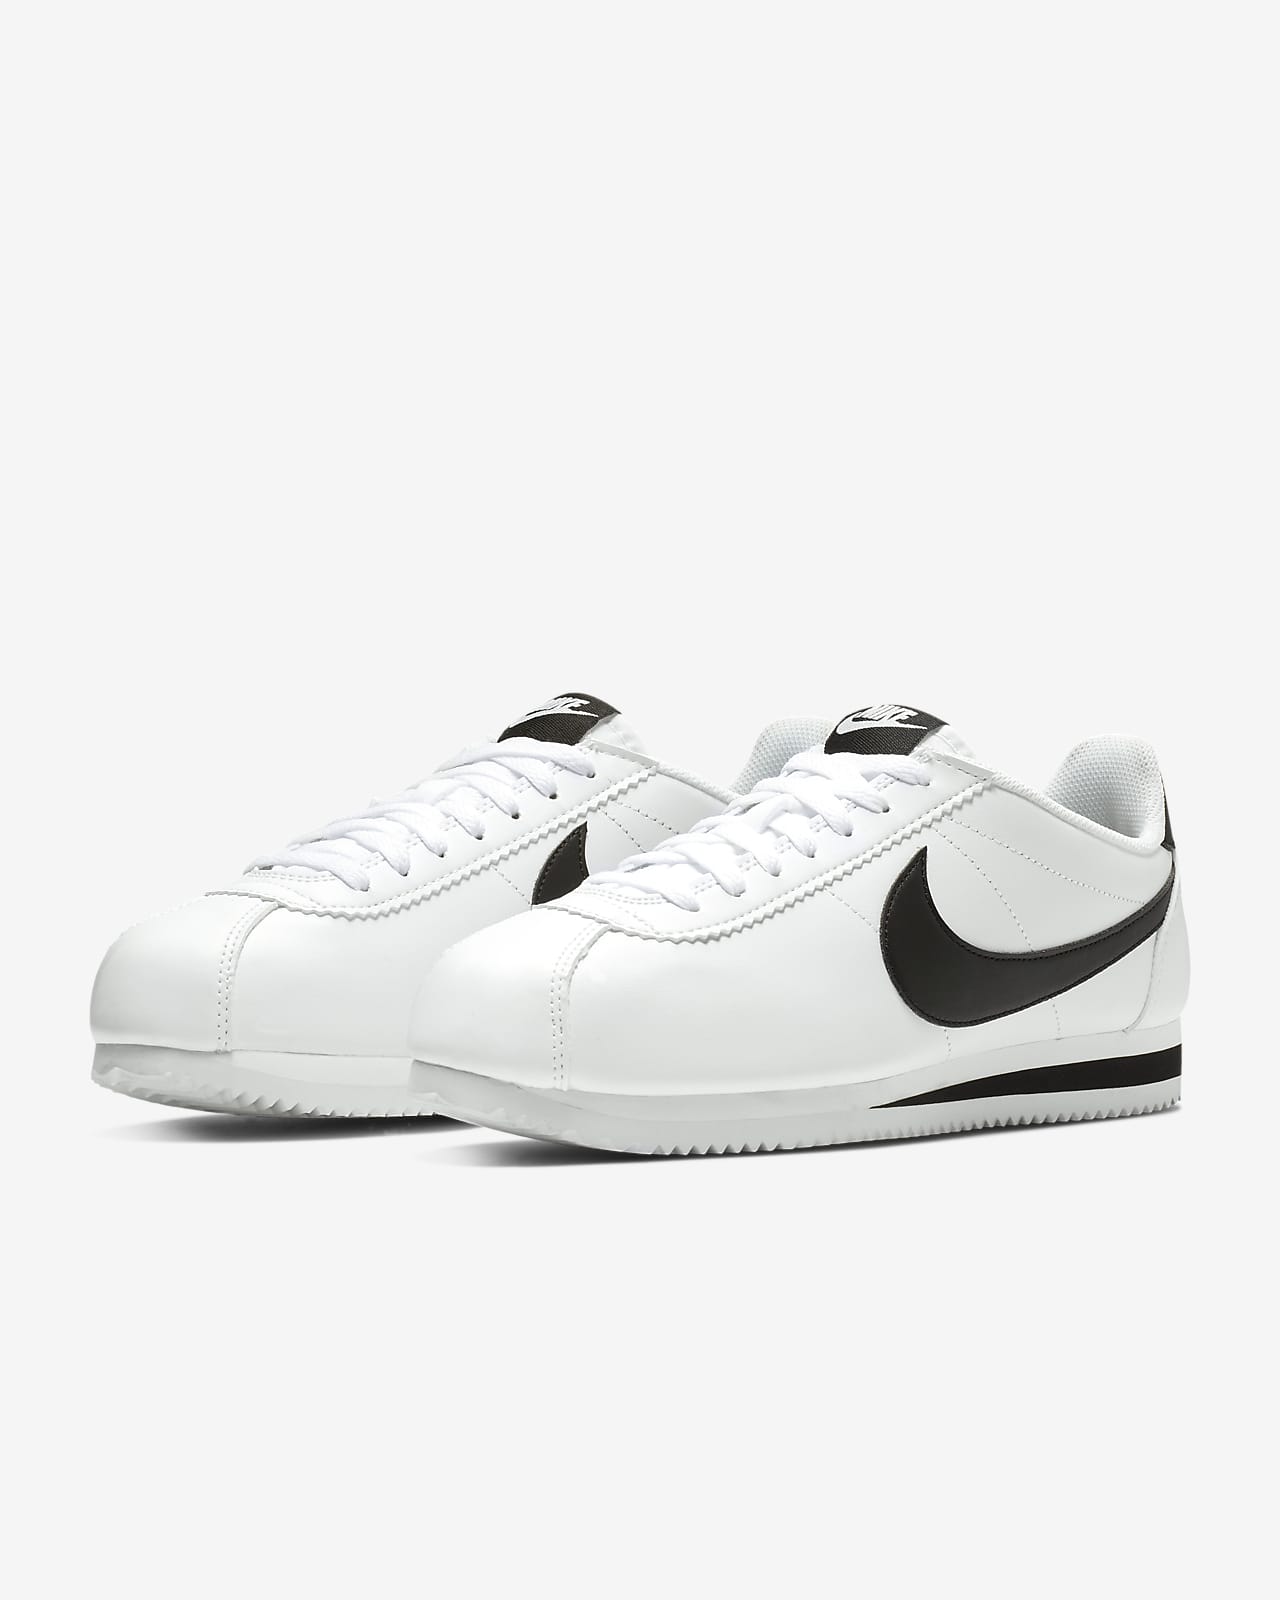 black and white cortez shoes